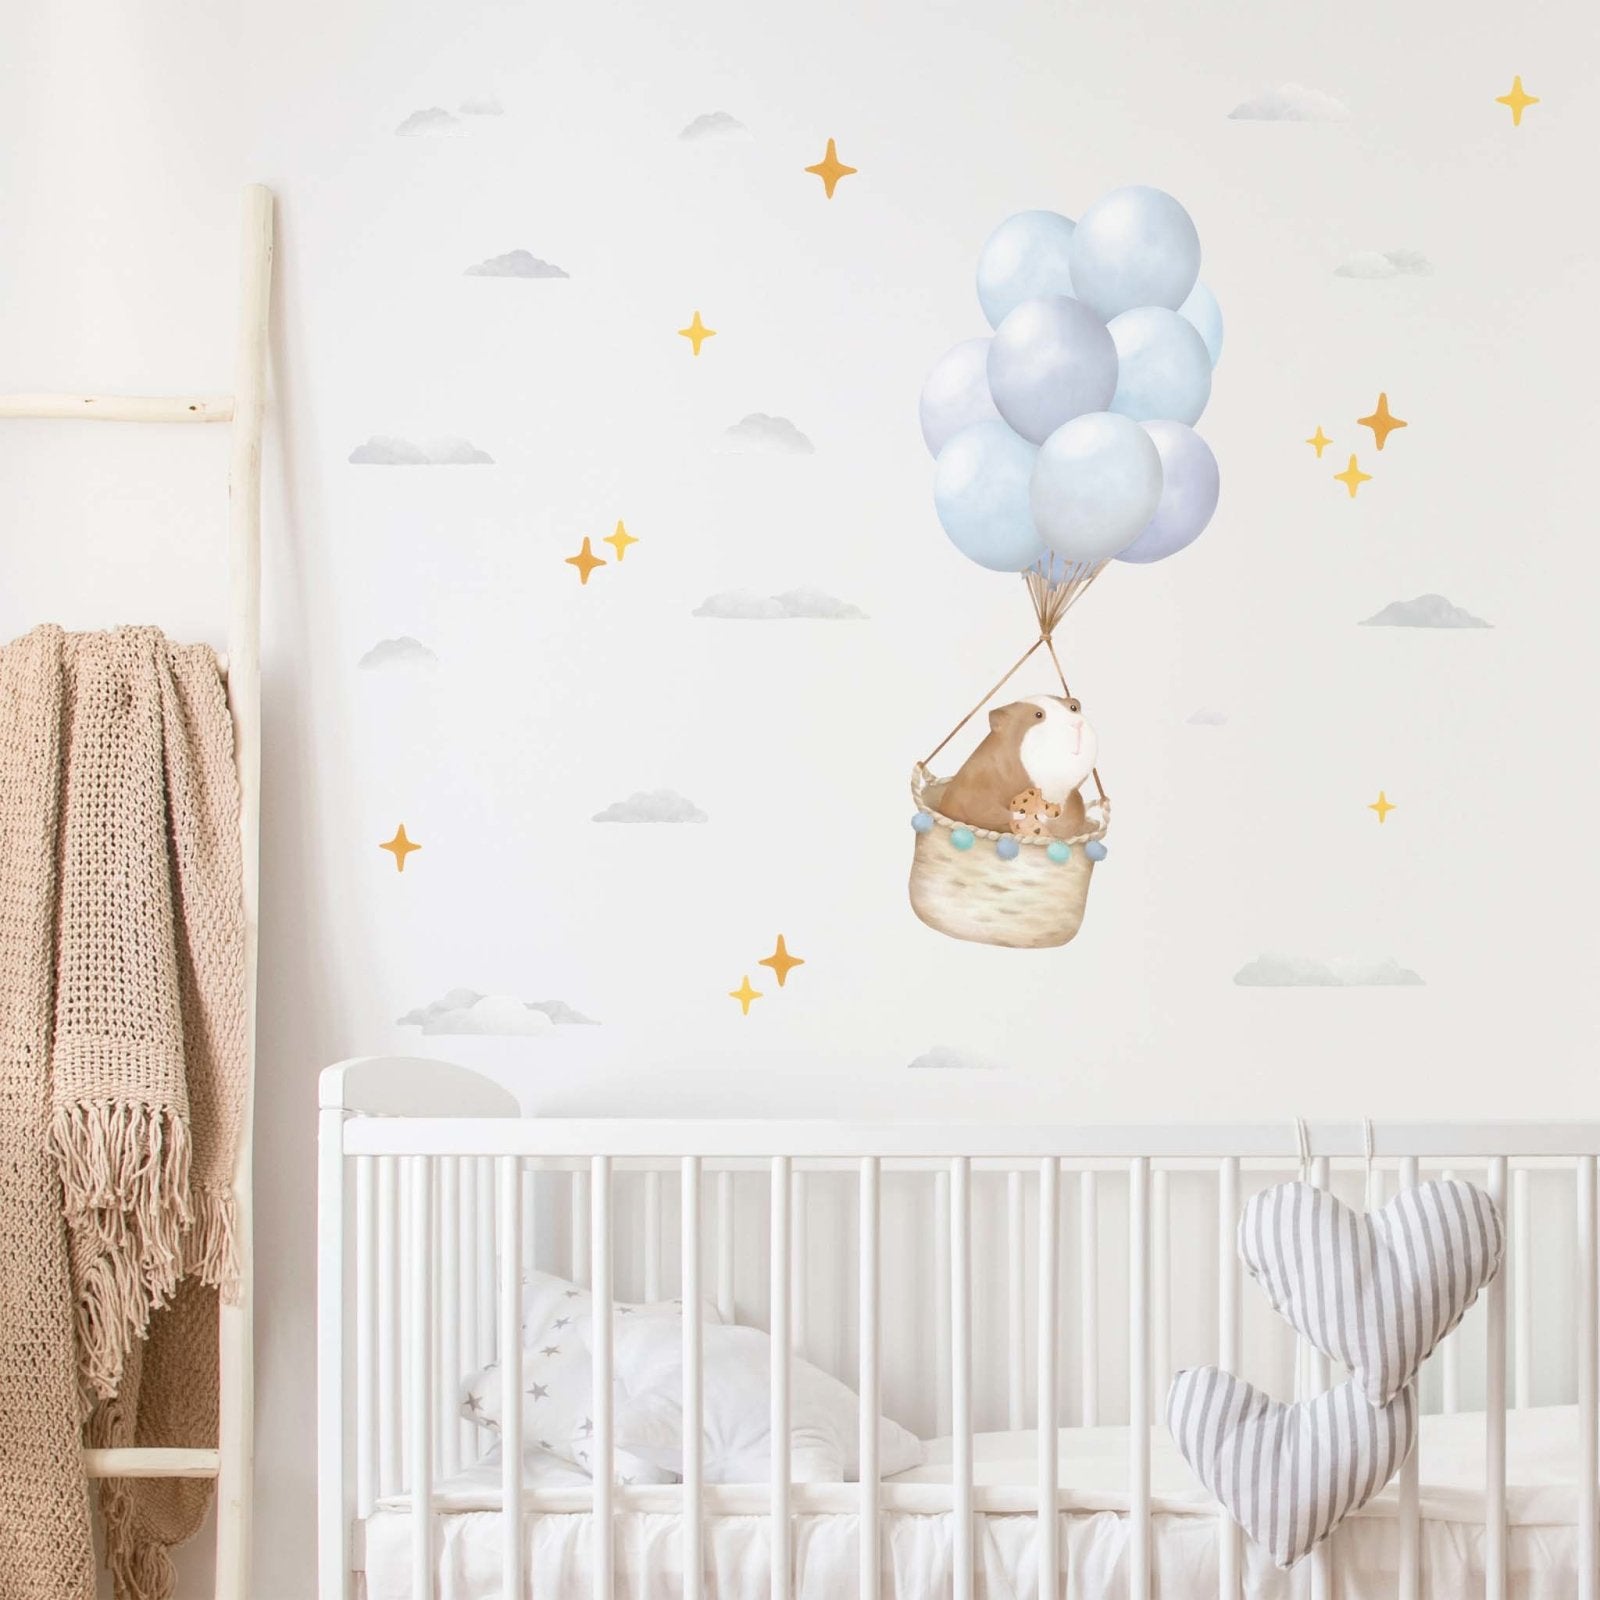 How To: Decorate with Adventuring Animal Wall Stickers - Made of Sundays